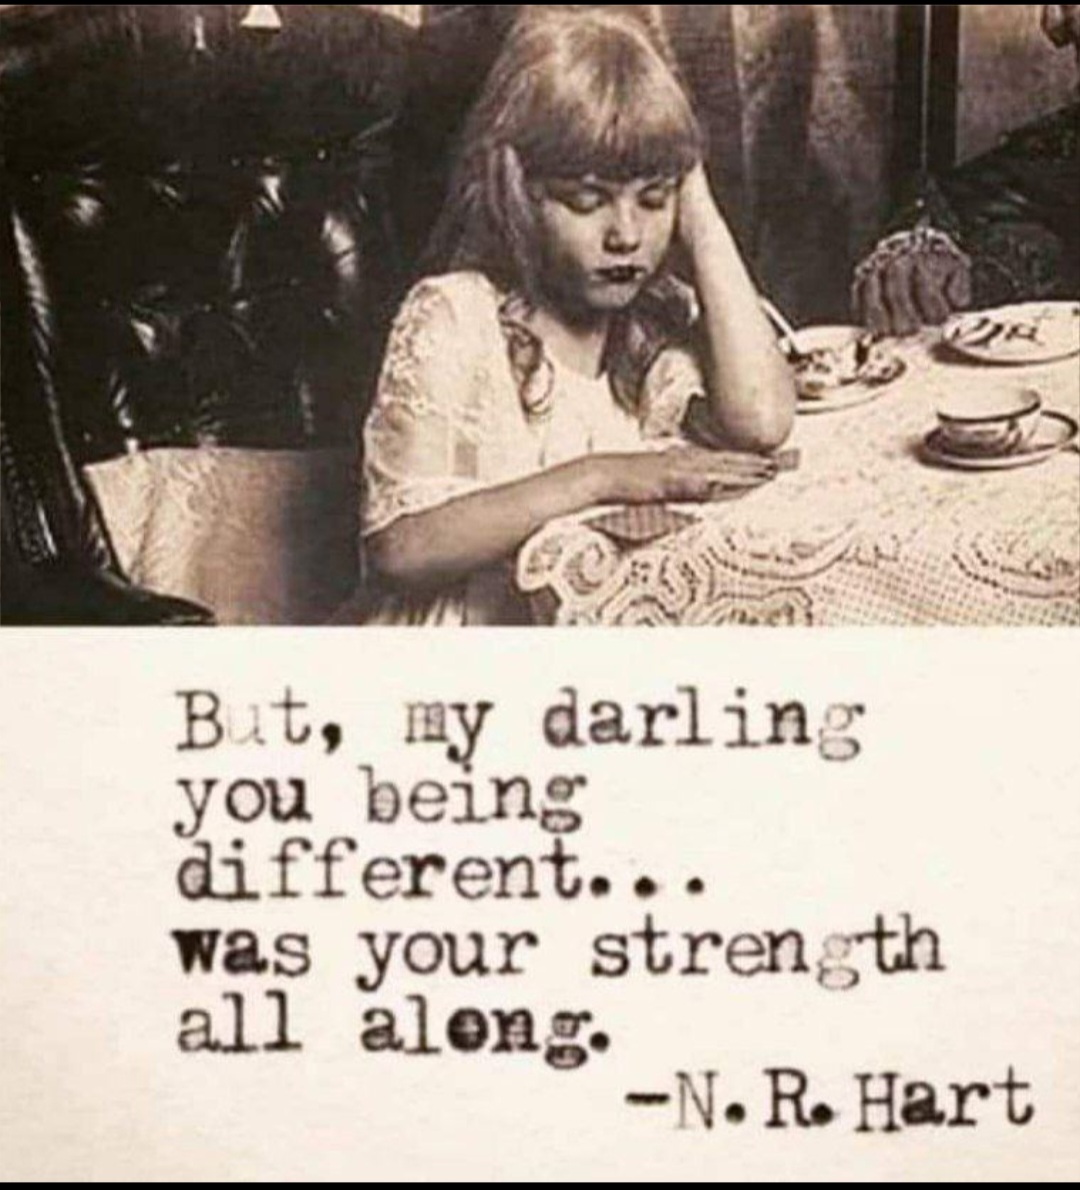 N.R. Hart quote, But, my darling you being different was your strength all along.